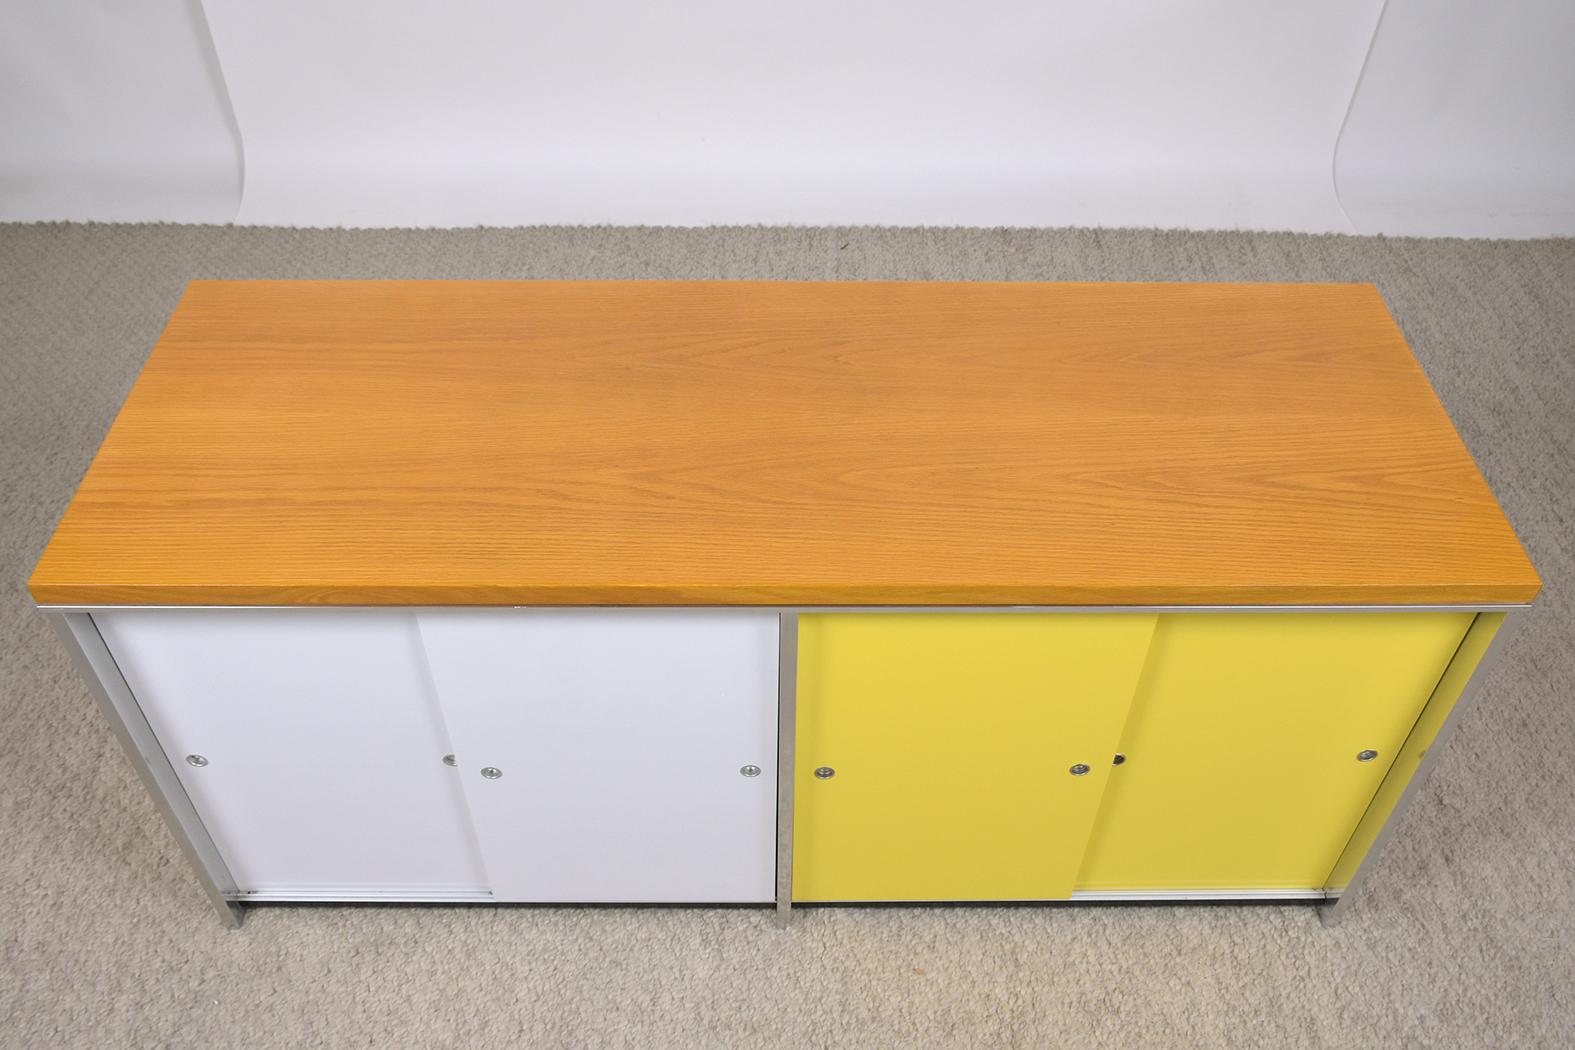 Stained Retro Chic: Vintage 1970s Danish Mid-Century Credenza with White & Yellow Finish For Sale